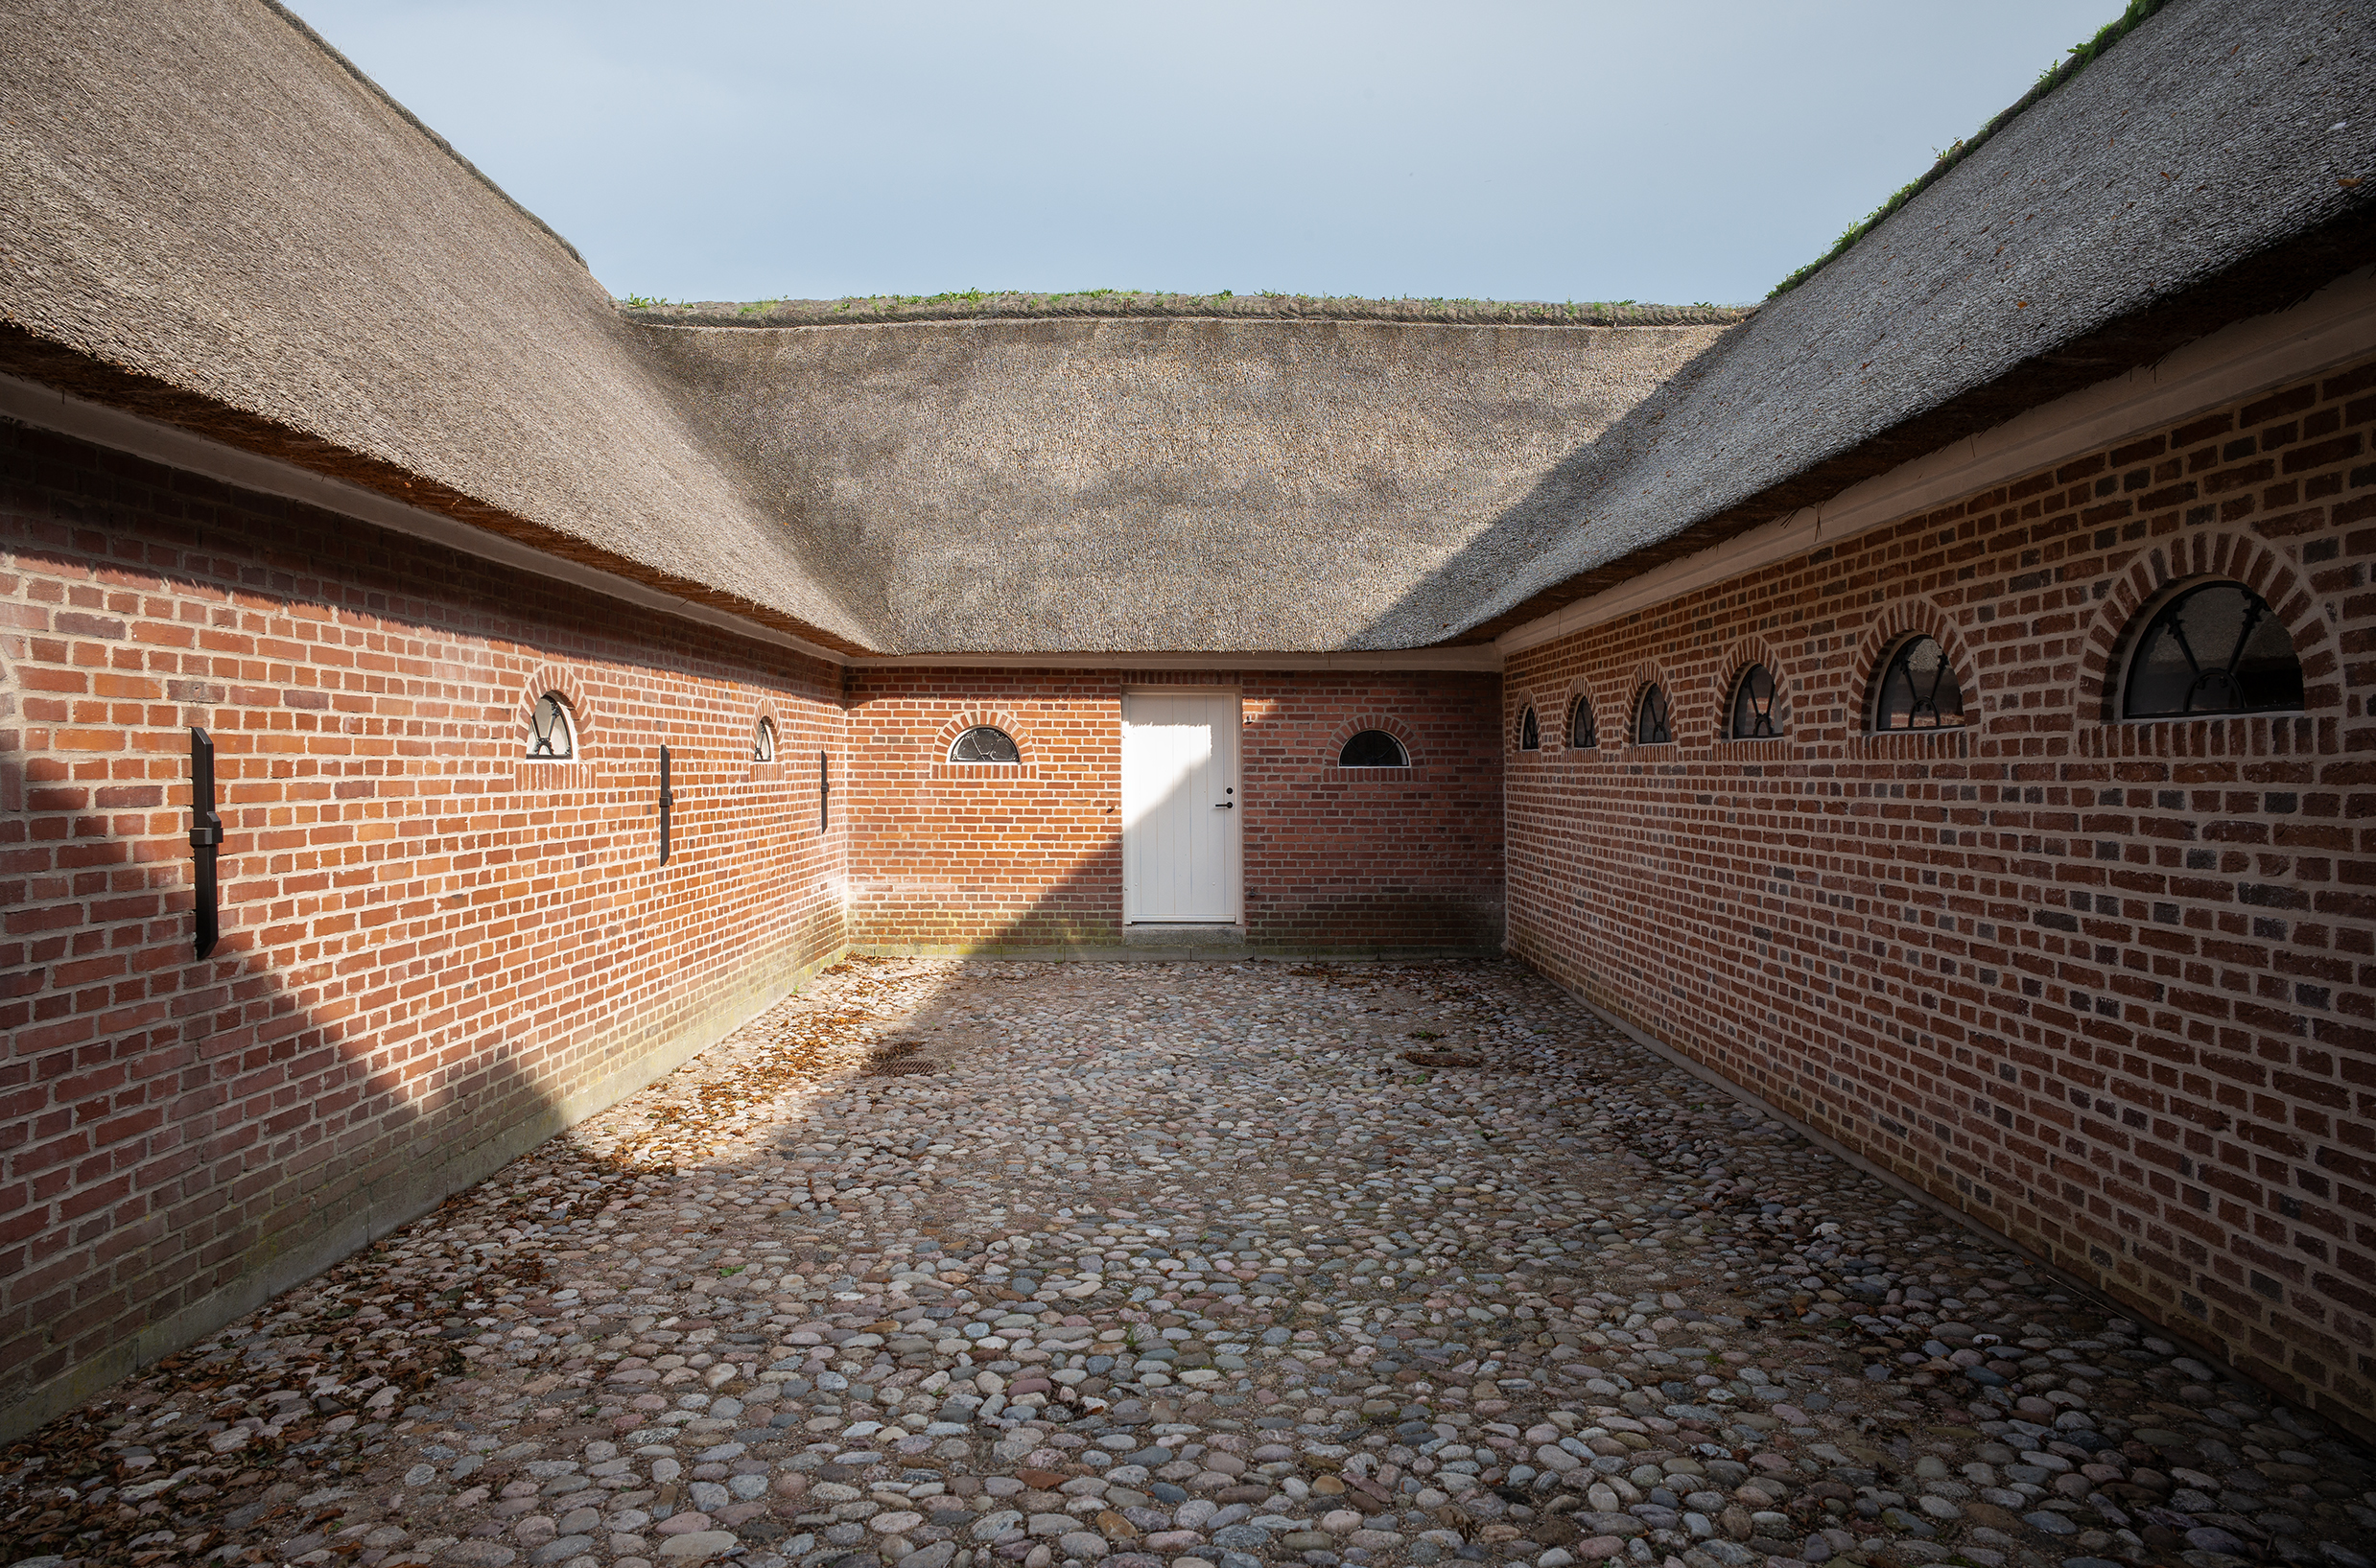 The small, enclosed courtyard, which is surrounded by Nørre Sødam's four lengths. Photo credit: Helene Høyer Mikkelsen